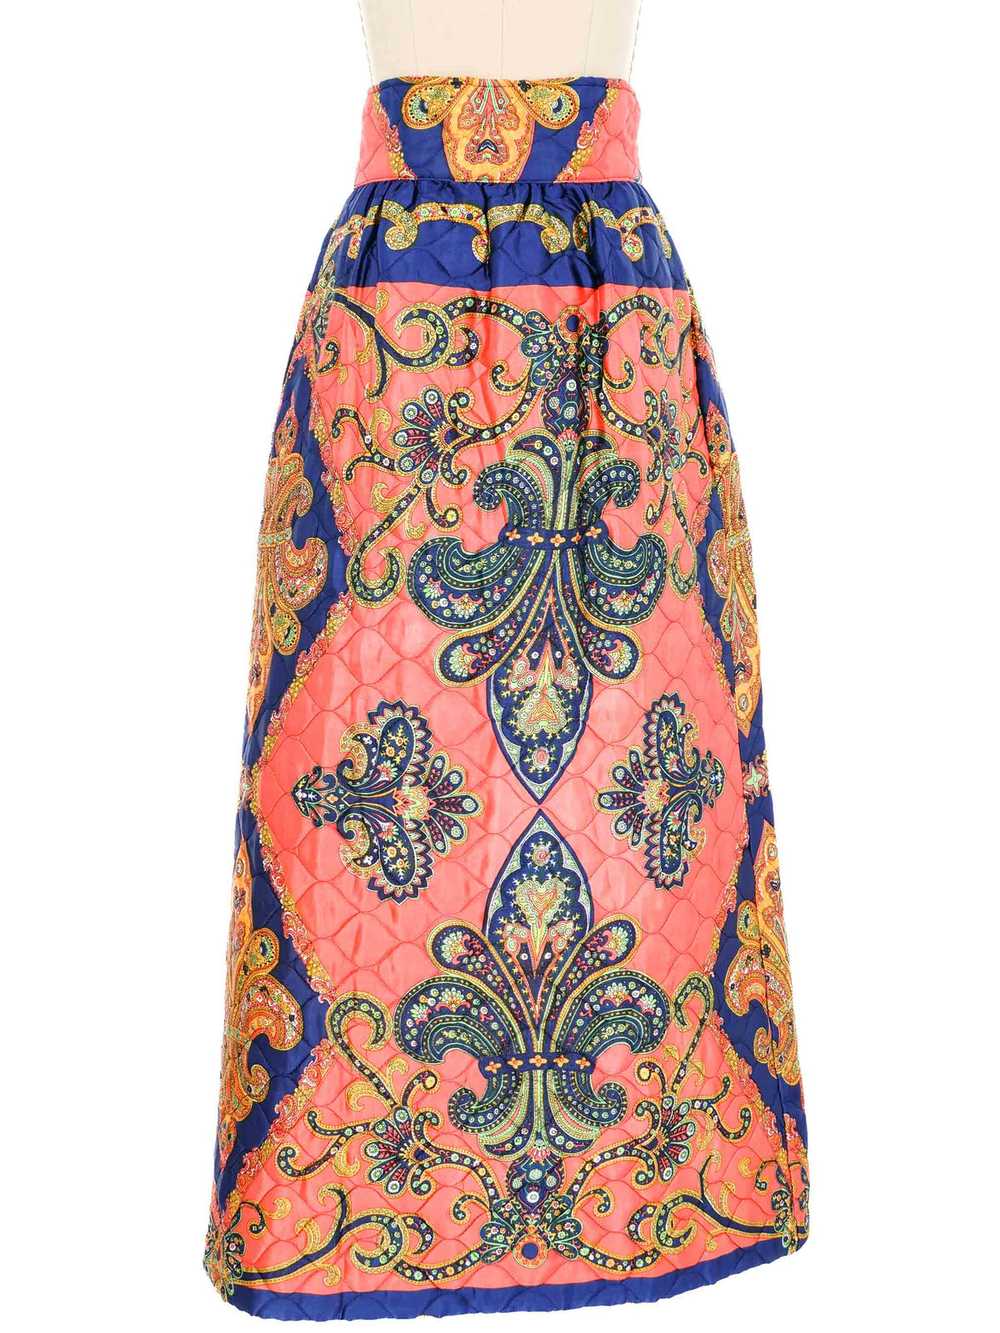 1970s Quilted Hostess Maxi Skirt - image 4